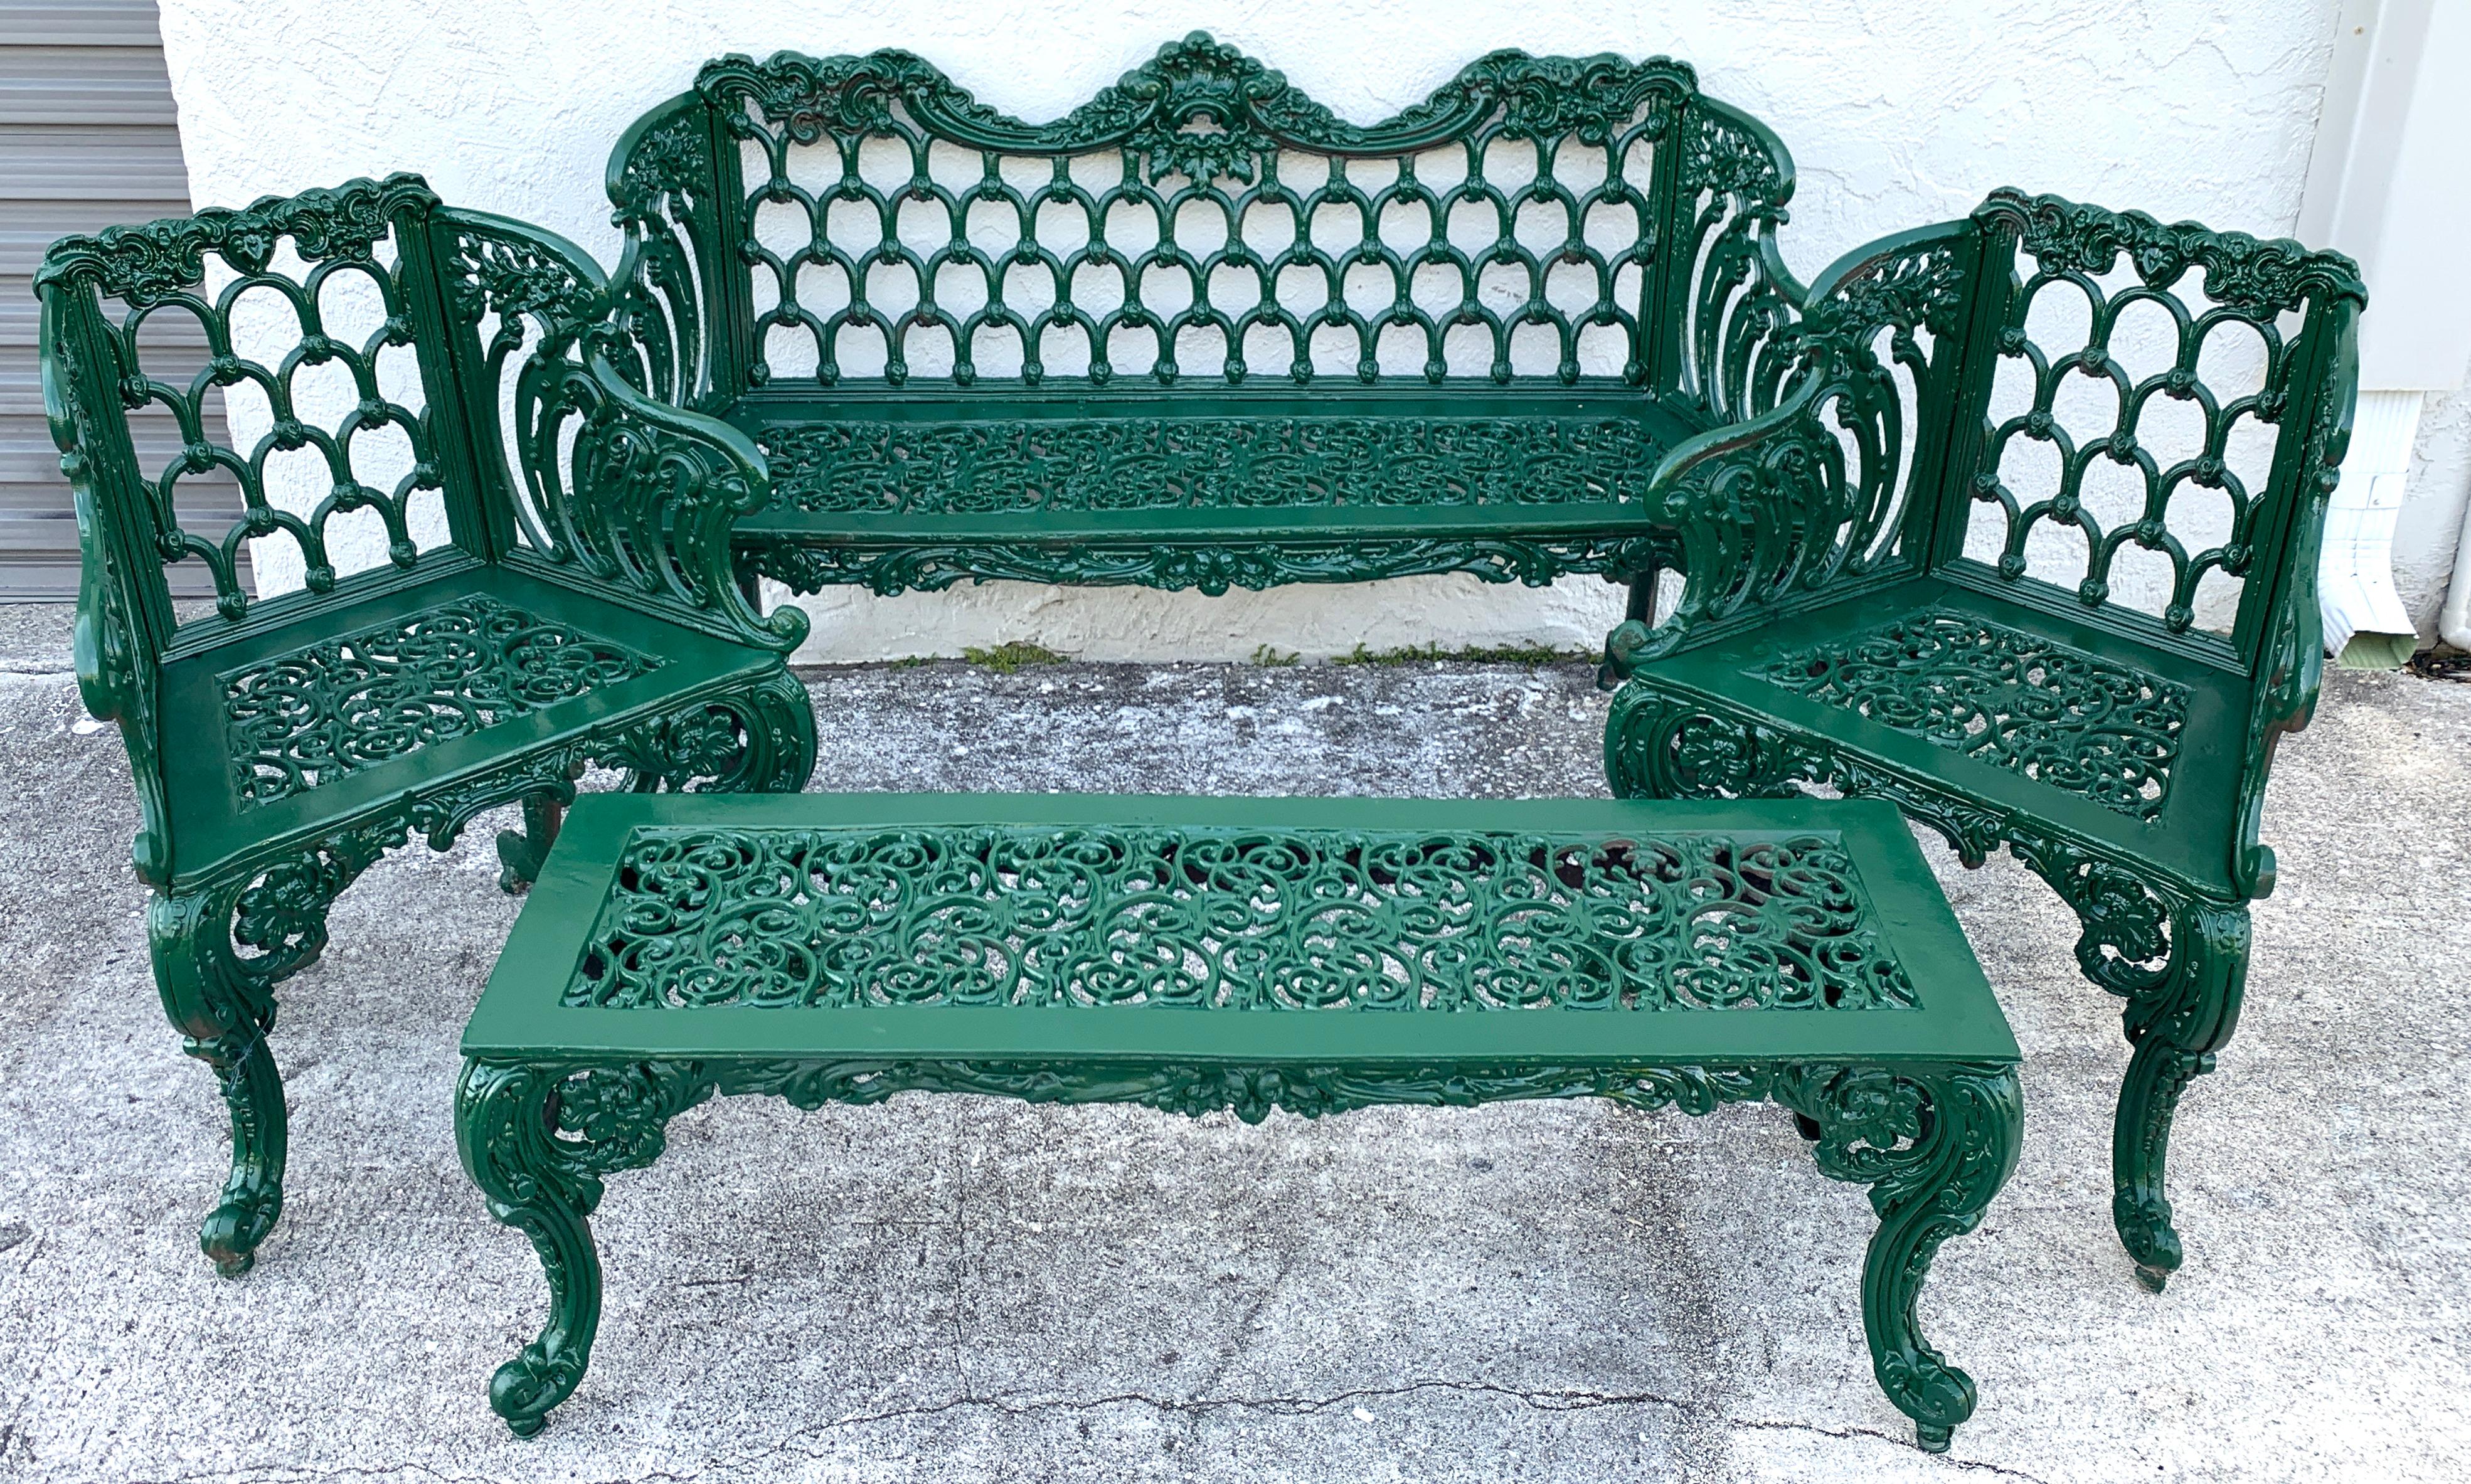 Four-piece Victorian style garden/ Patio set, provenance Celine Dion,
of cast aluminum, with stylized horseshoe motif. Consisting of a settee, pair of garden chairs and a long bench or table, painted in green
Settee measures: 60